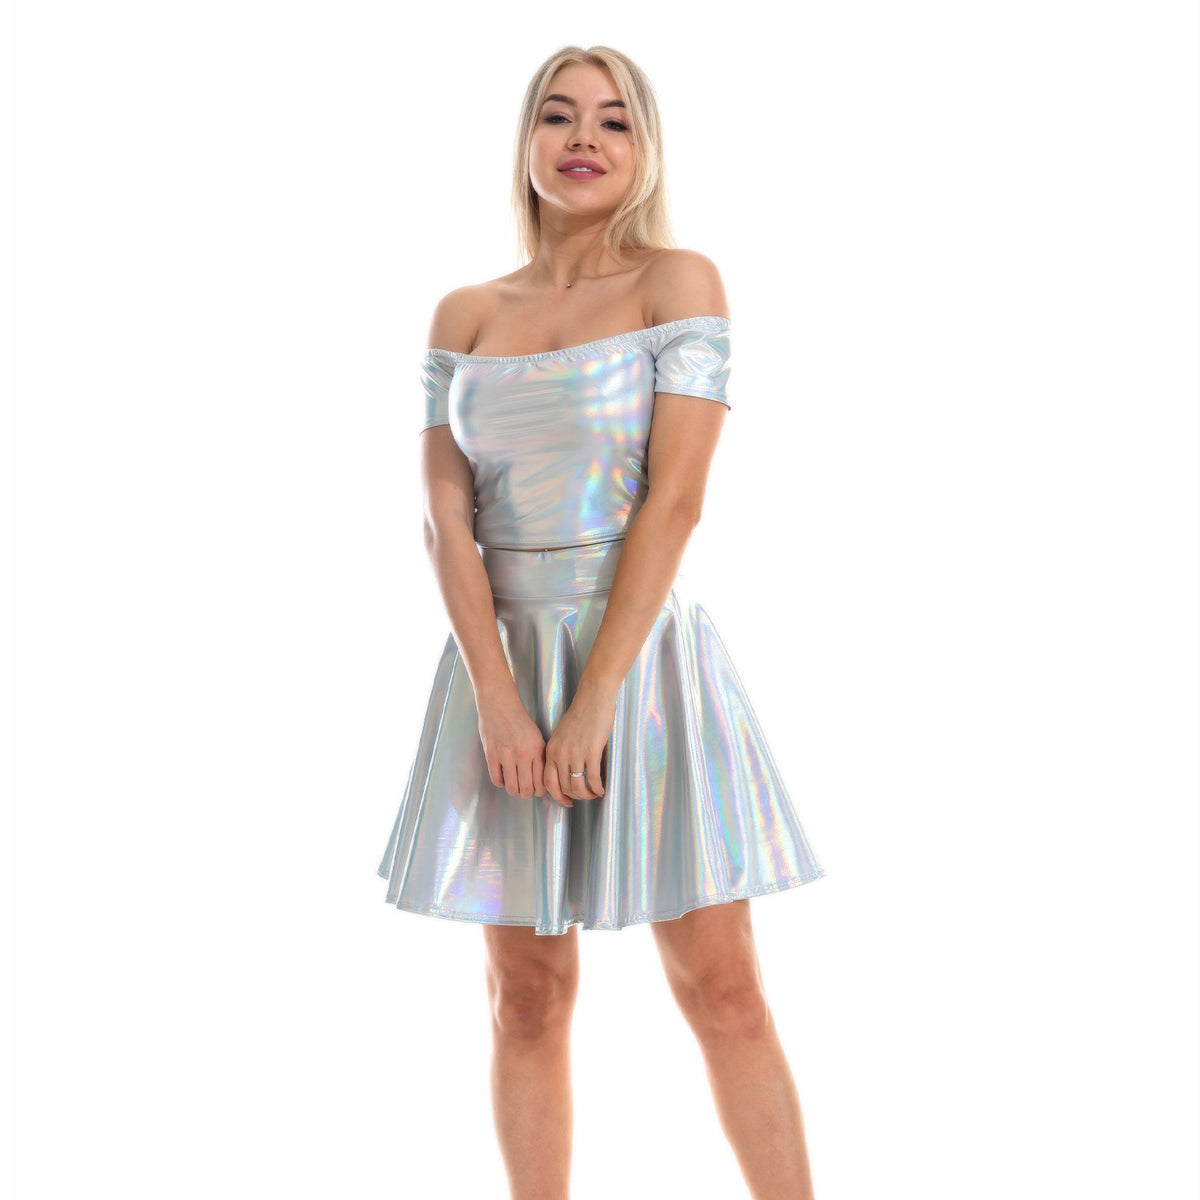 FYMNSI Rave Outfits for Women, Tassel Skirt Metallic Holographic